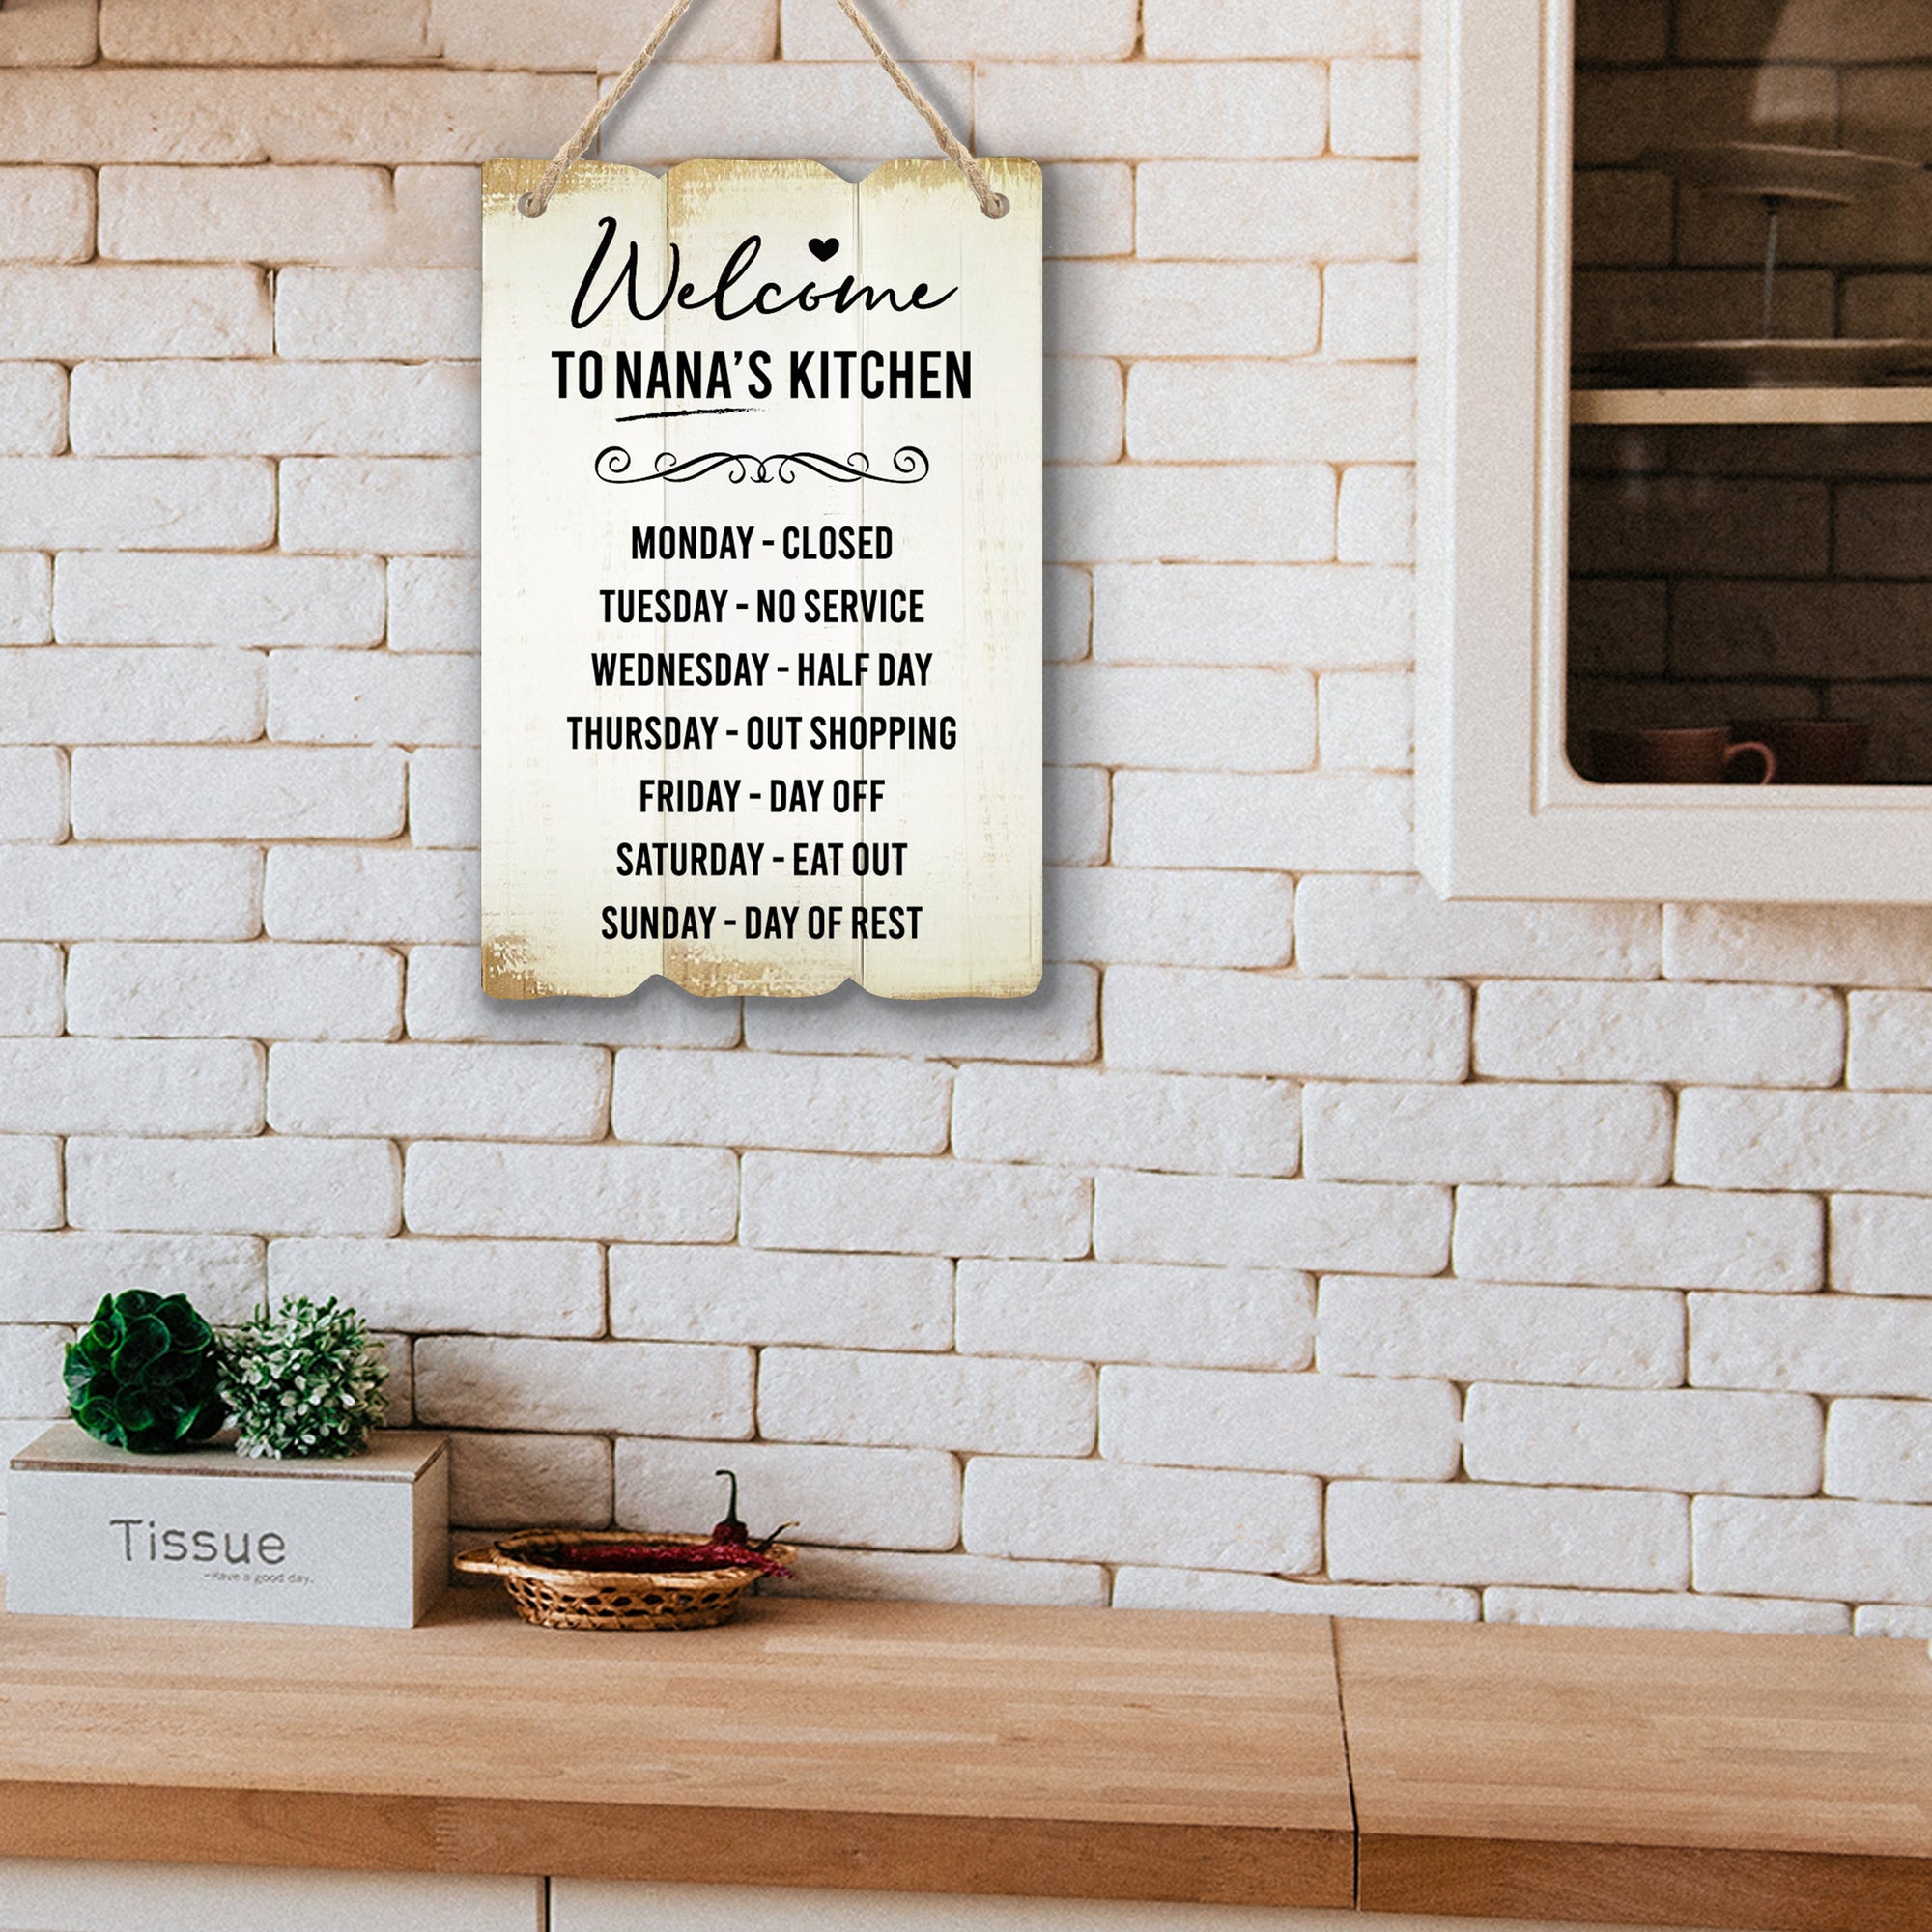 Welcome To Nana’s Kitchen Inspirational Wooden Wall Hanging Shaped Rope Sign Kitchen Home Décor